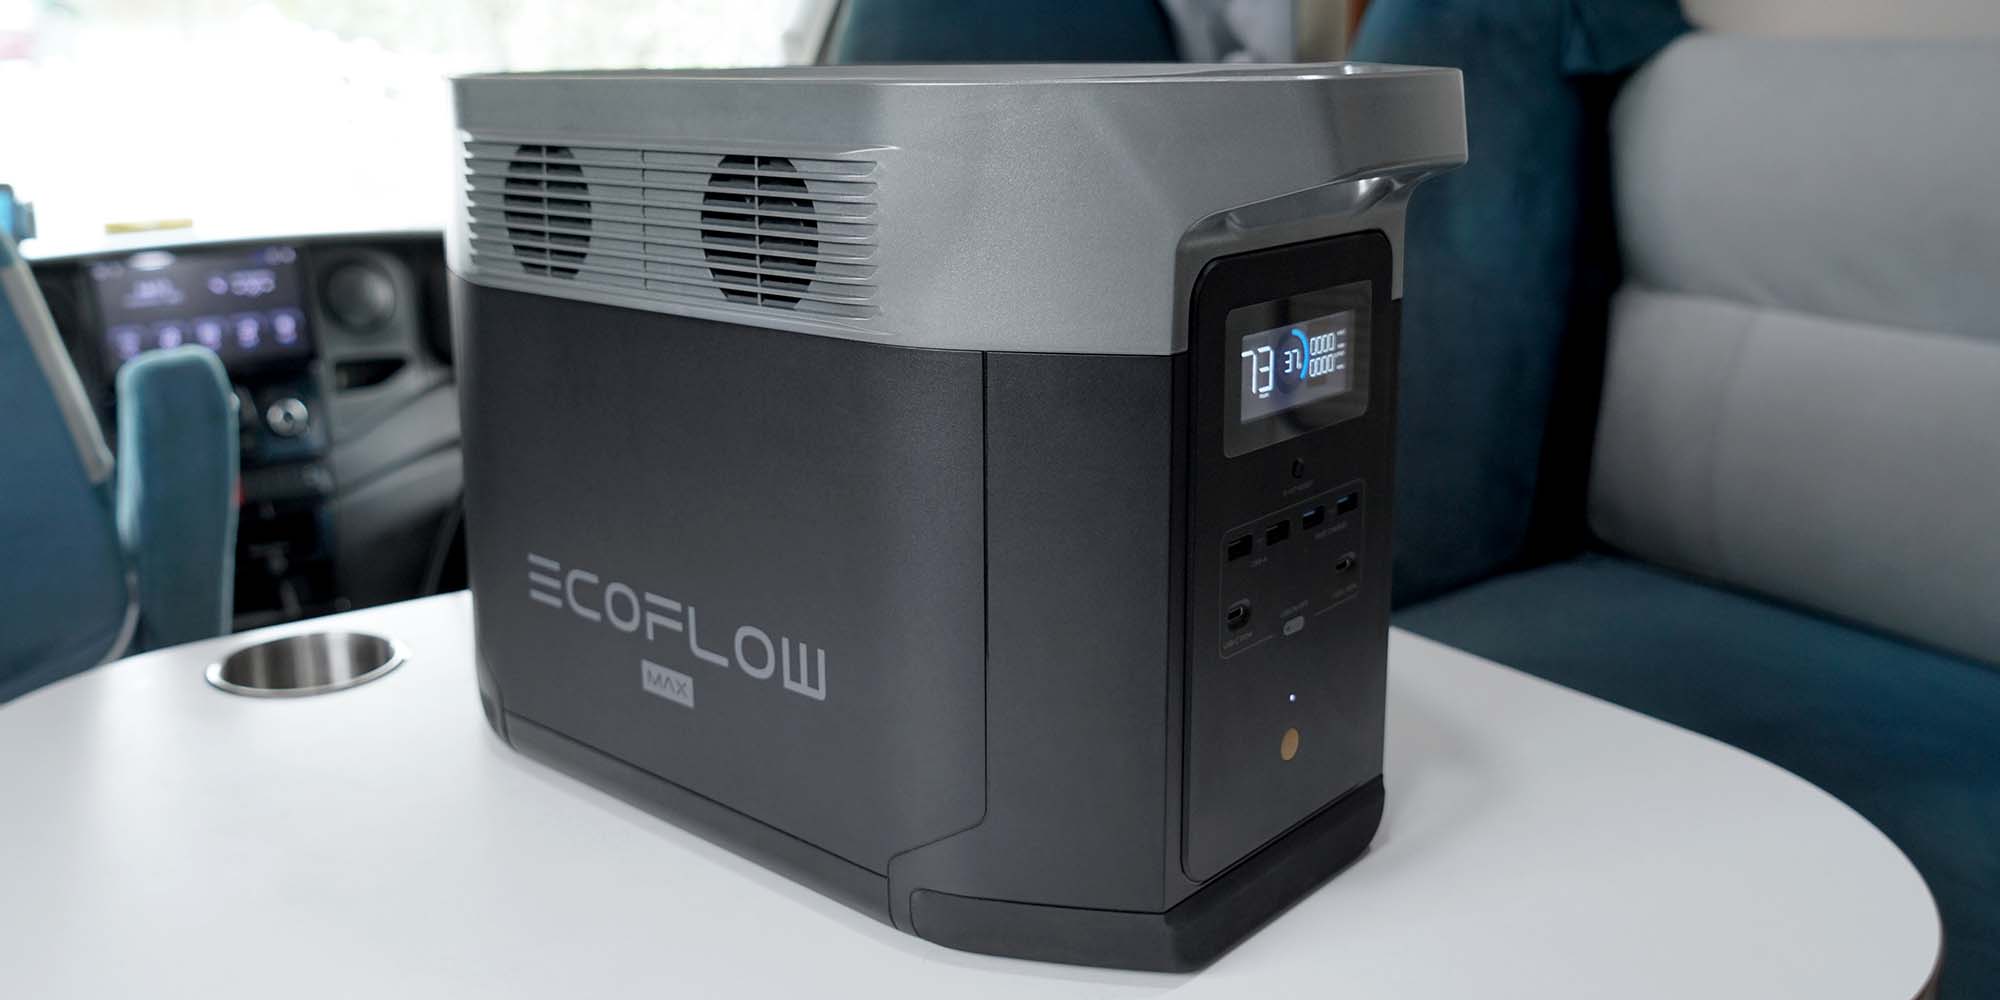 EcoFlow Delta II Review: How Does it Stack Up Against Competition?